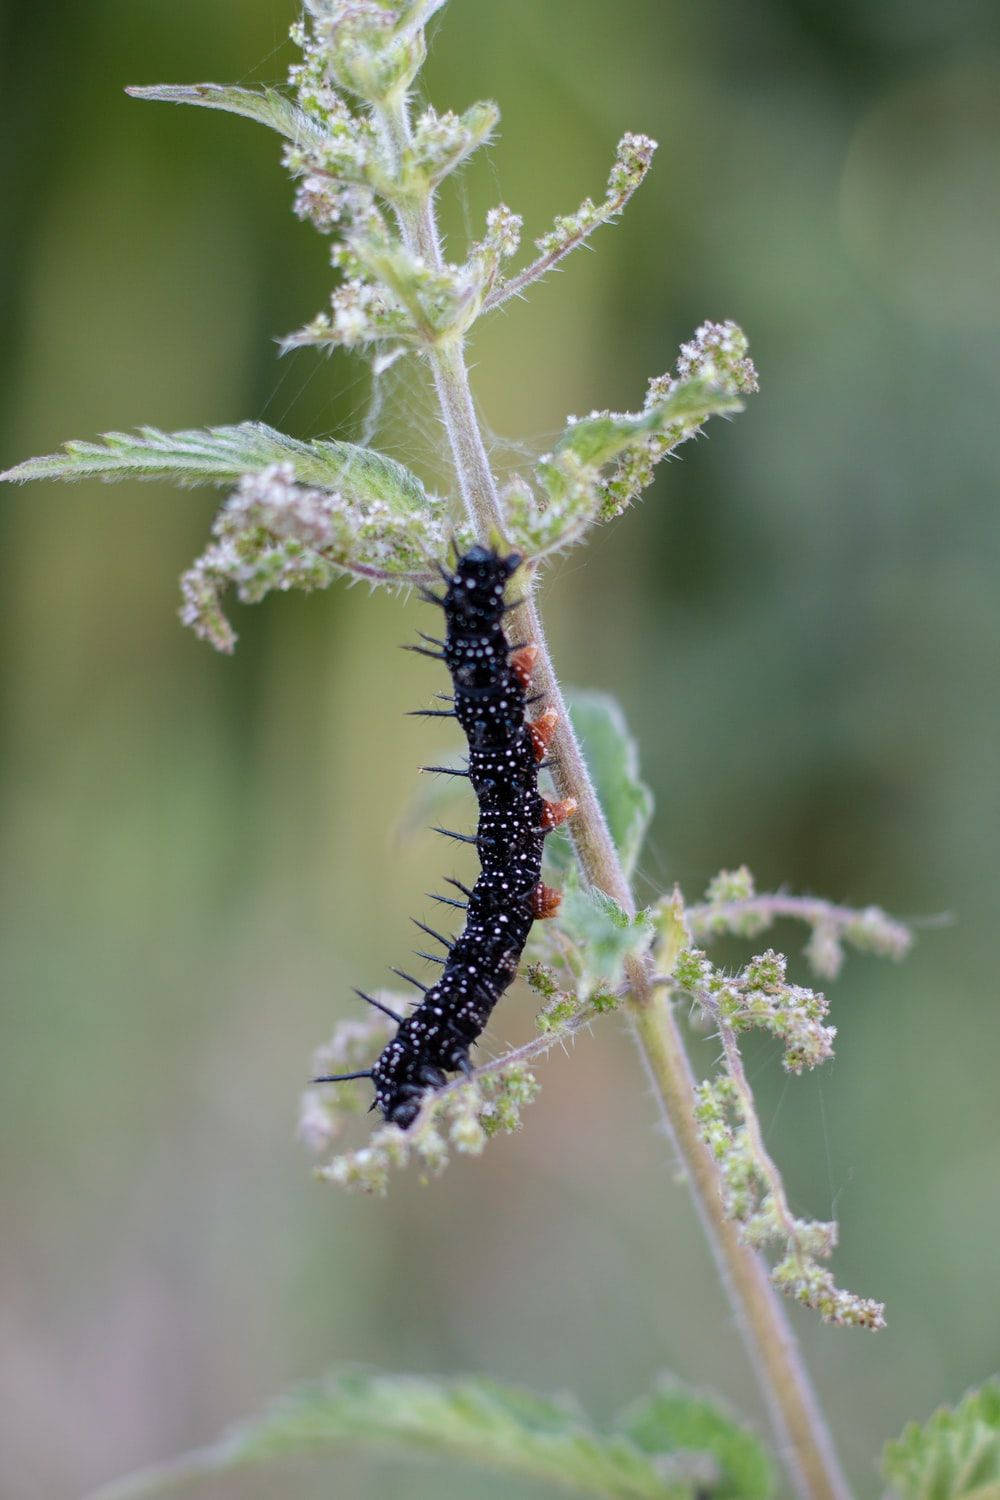 Black Caterpillar With White Spots